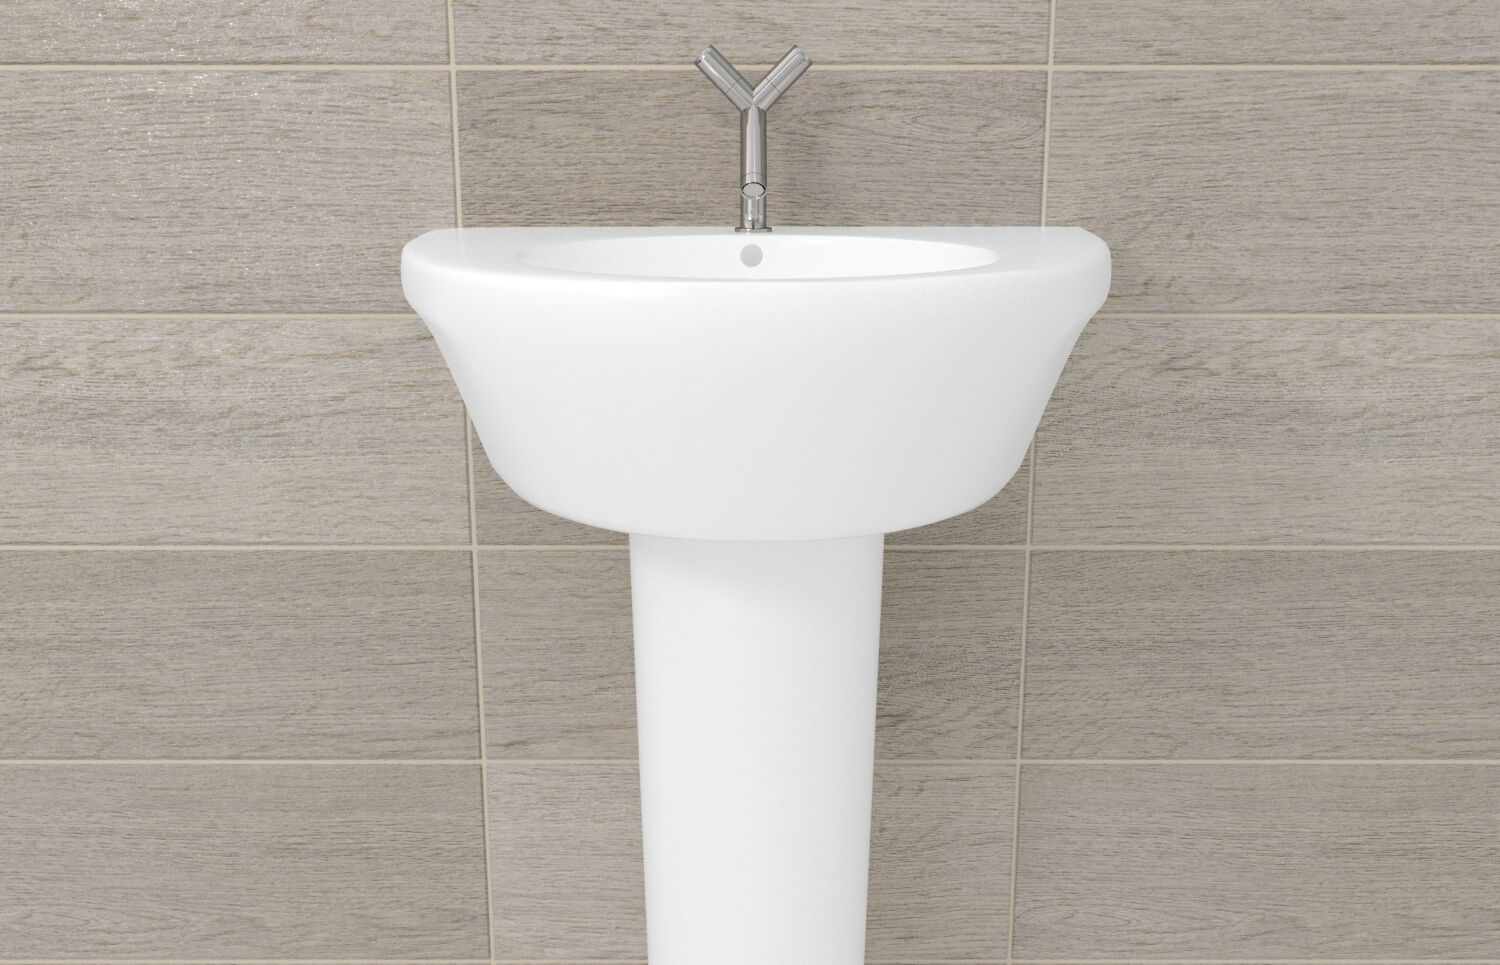 FISCHER PEDESTAL WASH BASIN FIXING WBP1 CISTERN WALL HIGH QUALITY SINK SANITARY